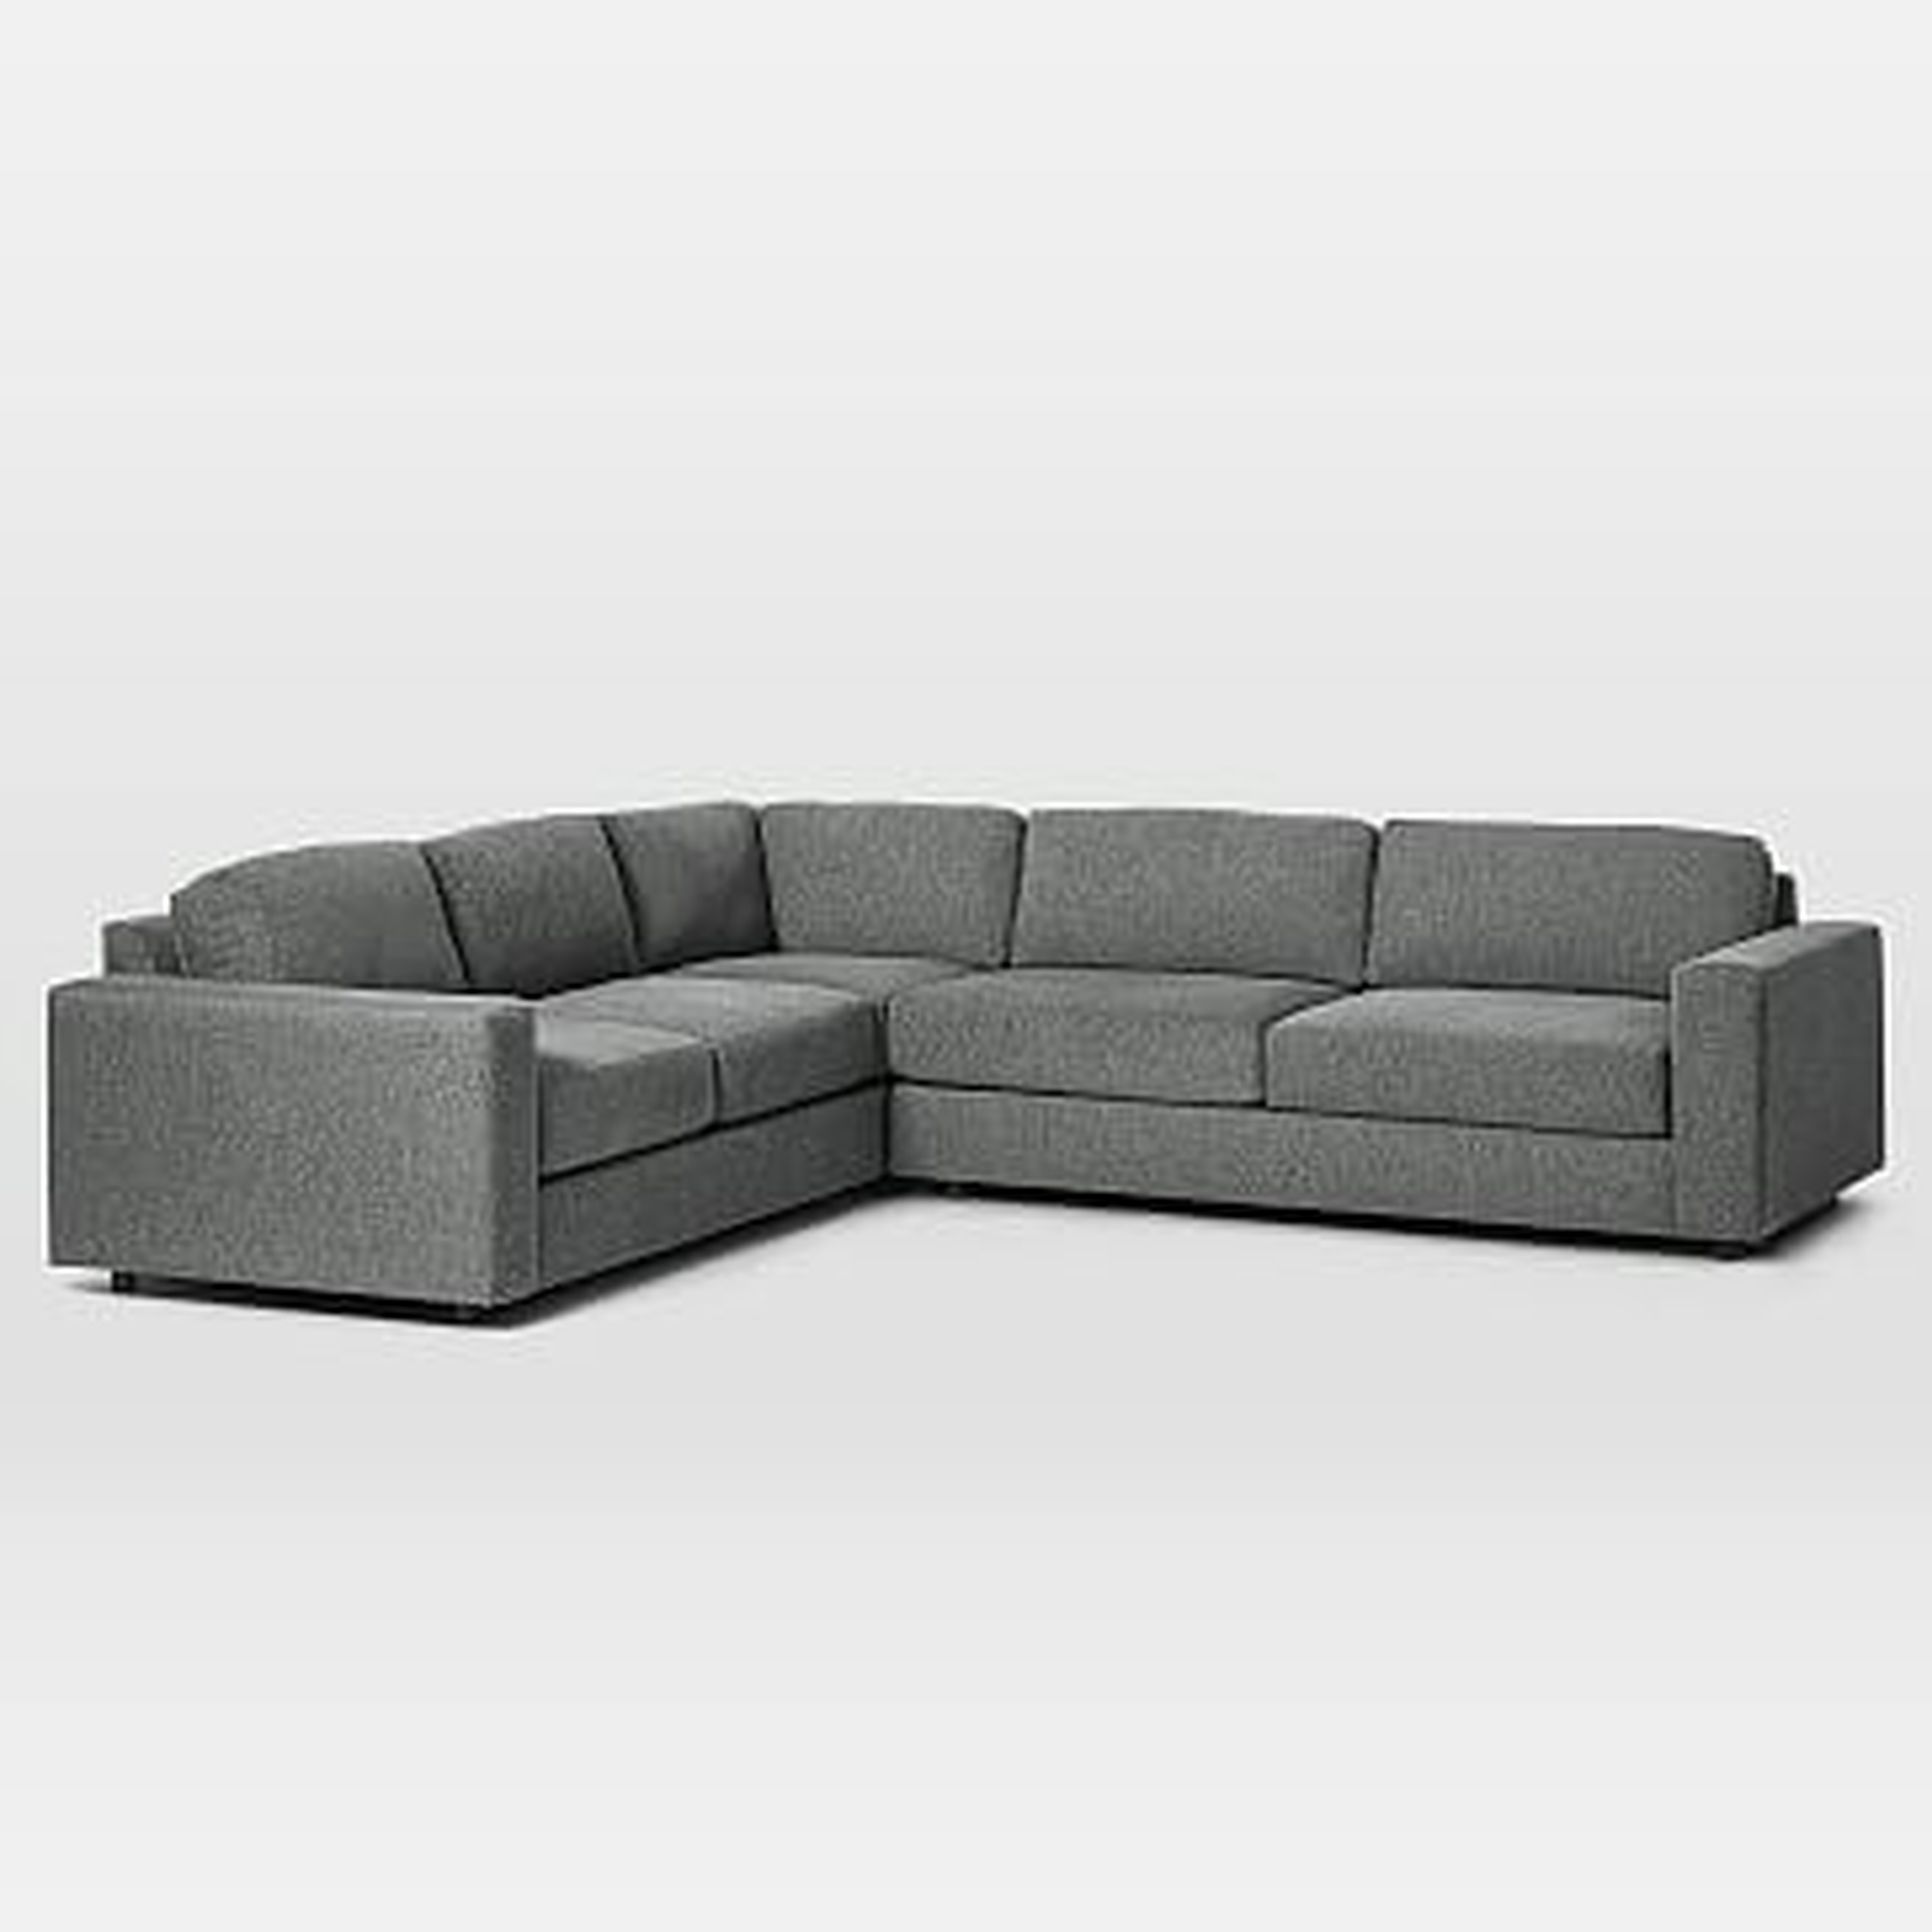 Urban Sectional Set 08: Left Arm 2 Seater Sofa, Corner, Right Arm 3 Seater Sofa, Down Fill, Chenille Tweed, Pewter, - West Elm